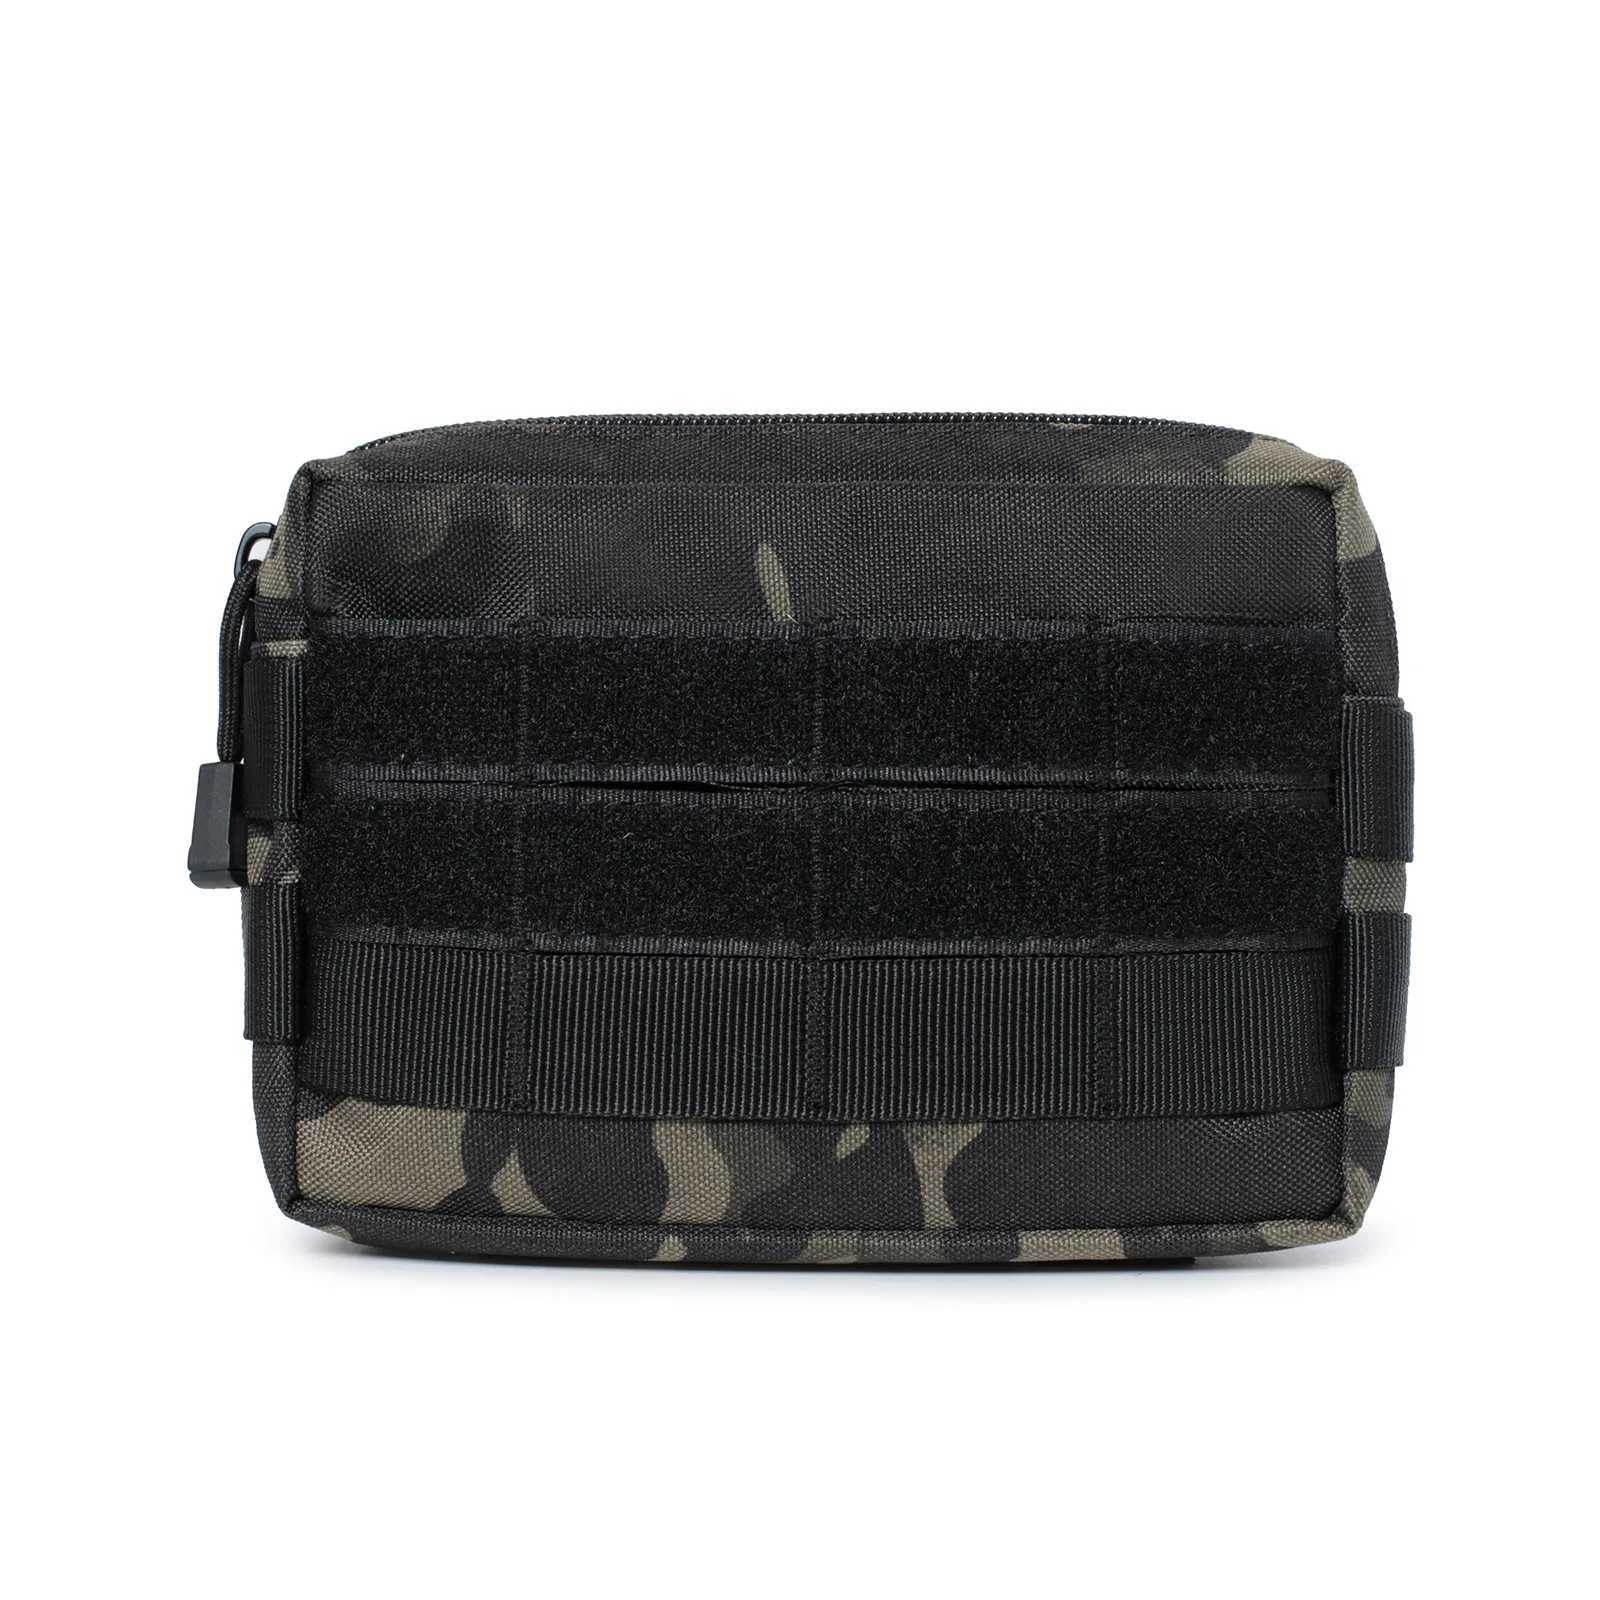 Tool Bag Military Molle EDC Tool Pouch Tactical Waist Pack Medical First Aid Bag Phone Holder Outdoor Camping Hunting Accessories Bags